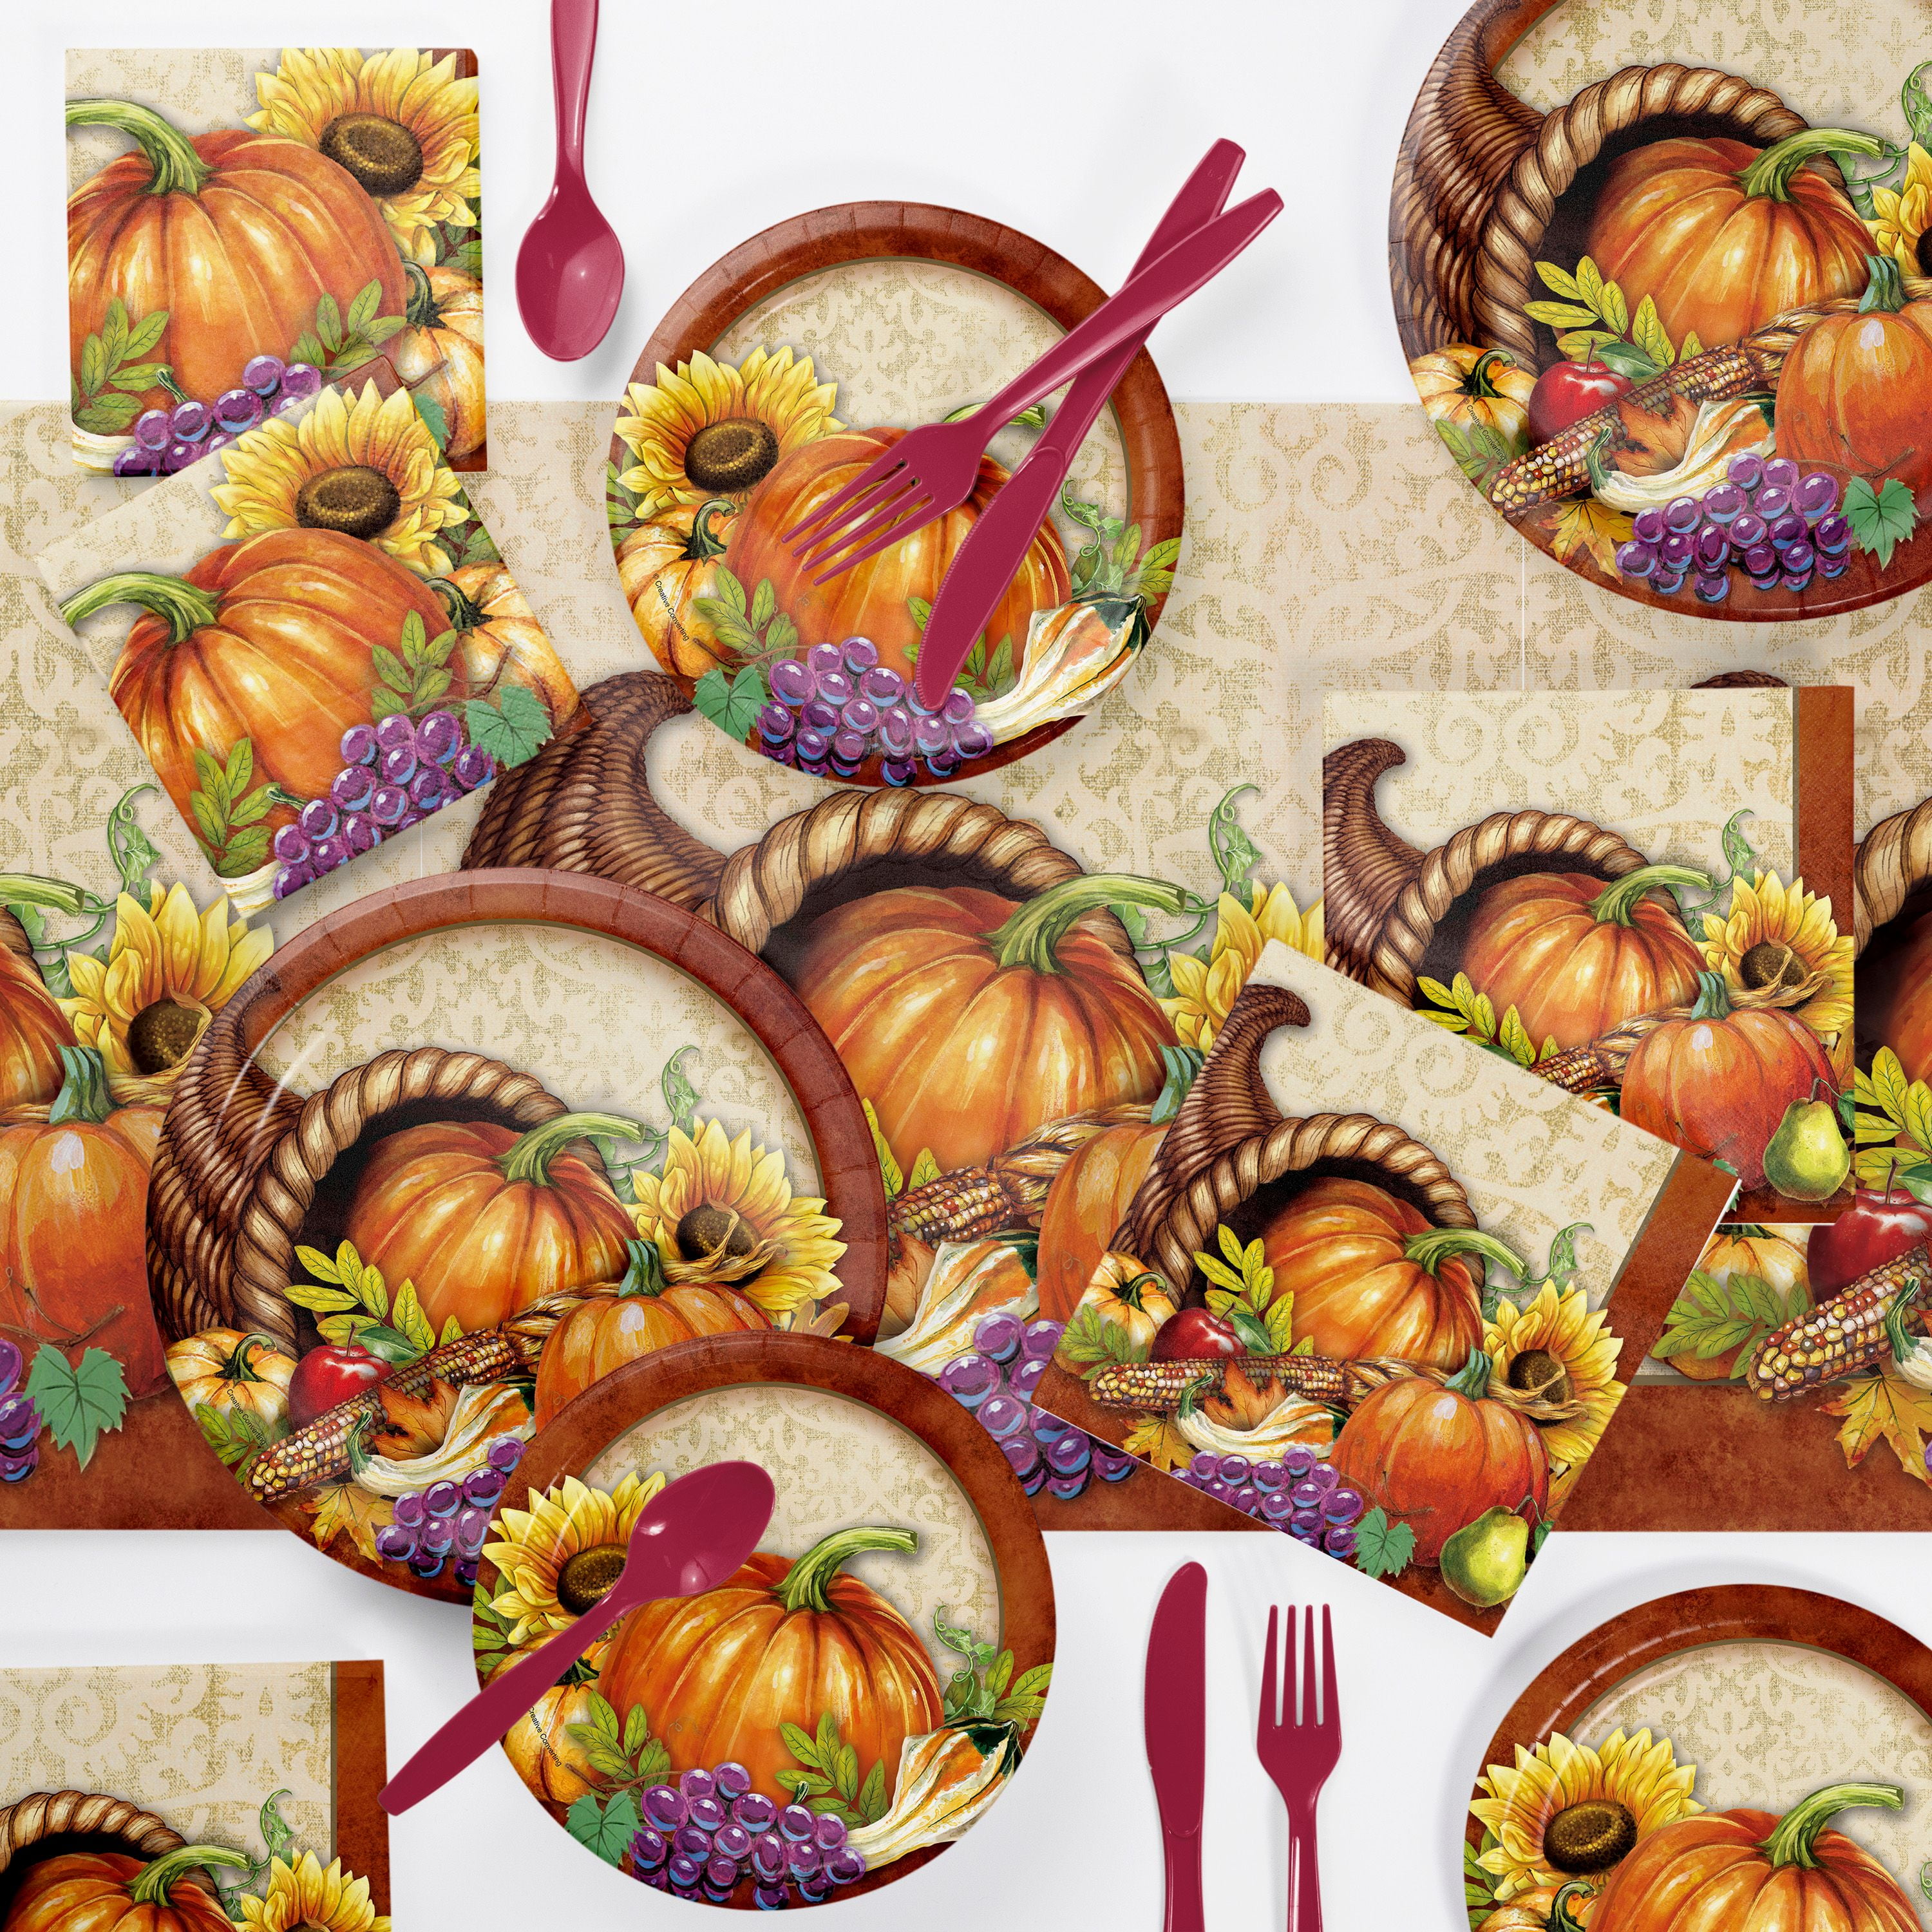 Bountiful Thanksgiving Party Supplies Kit for 8 Guests - Walmart.com